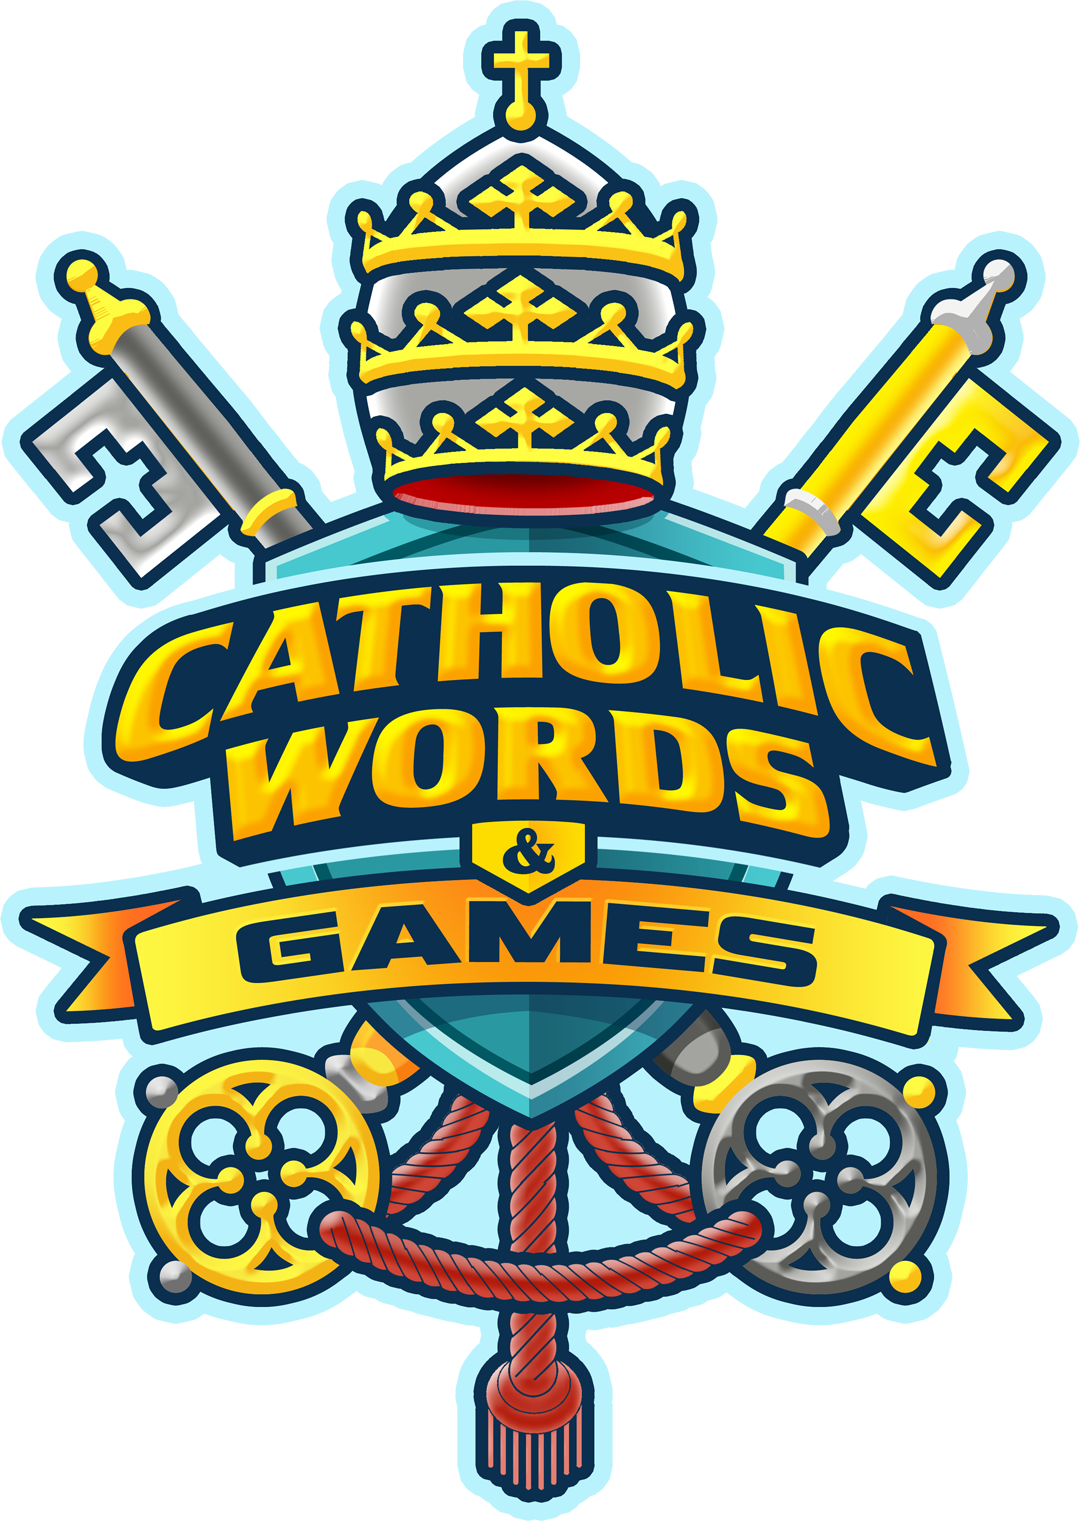 Catholic Words & Games App Review - Catholic Words Card Matching Game, Volume. (1080x1521)